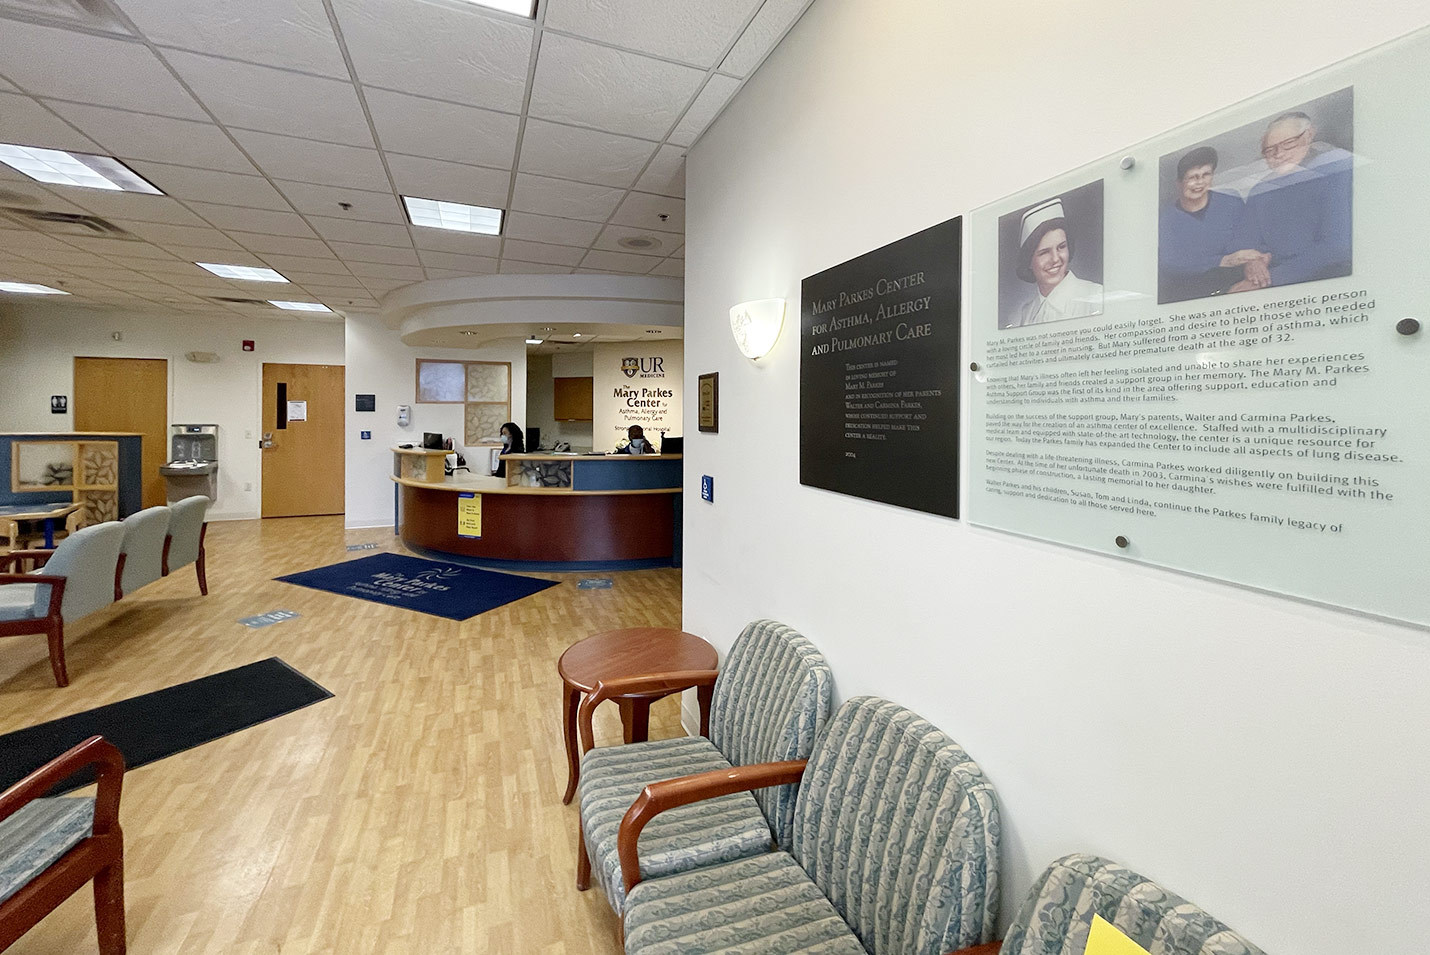 The Mary Parkes Center was designed with your comfort in mind. Whether you are looking to establish your lung care through the center or you are seeking a second opinion regarding your lung diagnosis, we want you to breathe easier from the moment you step in the door.